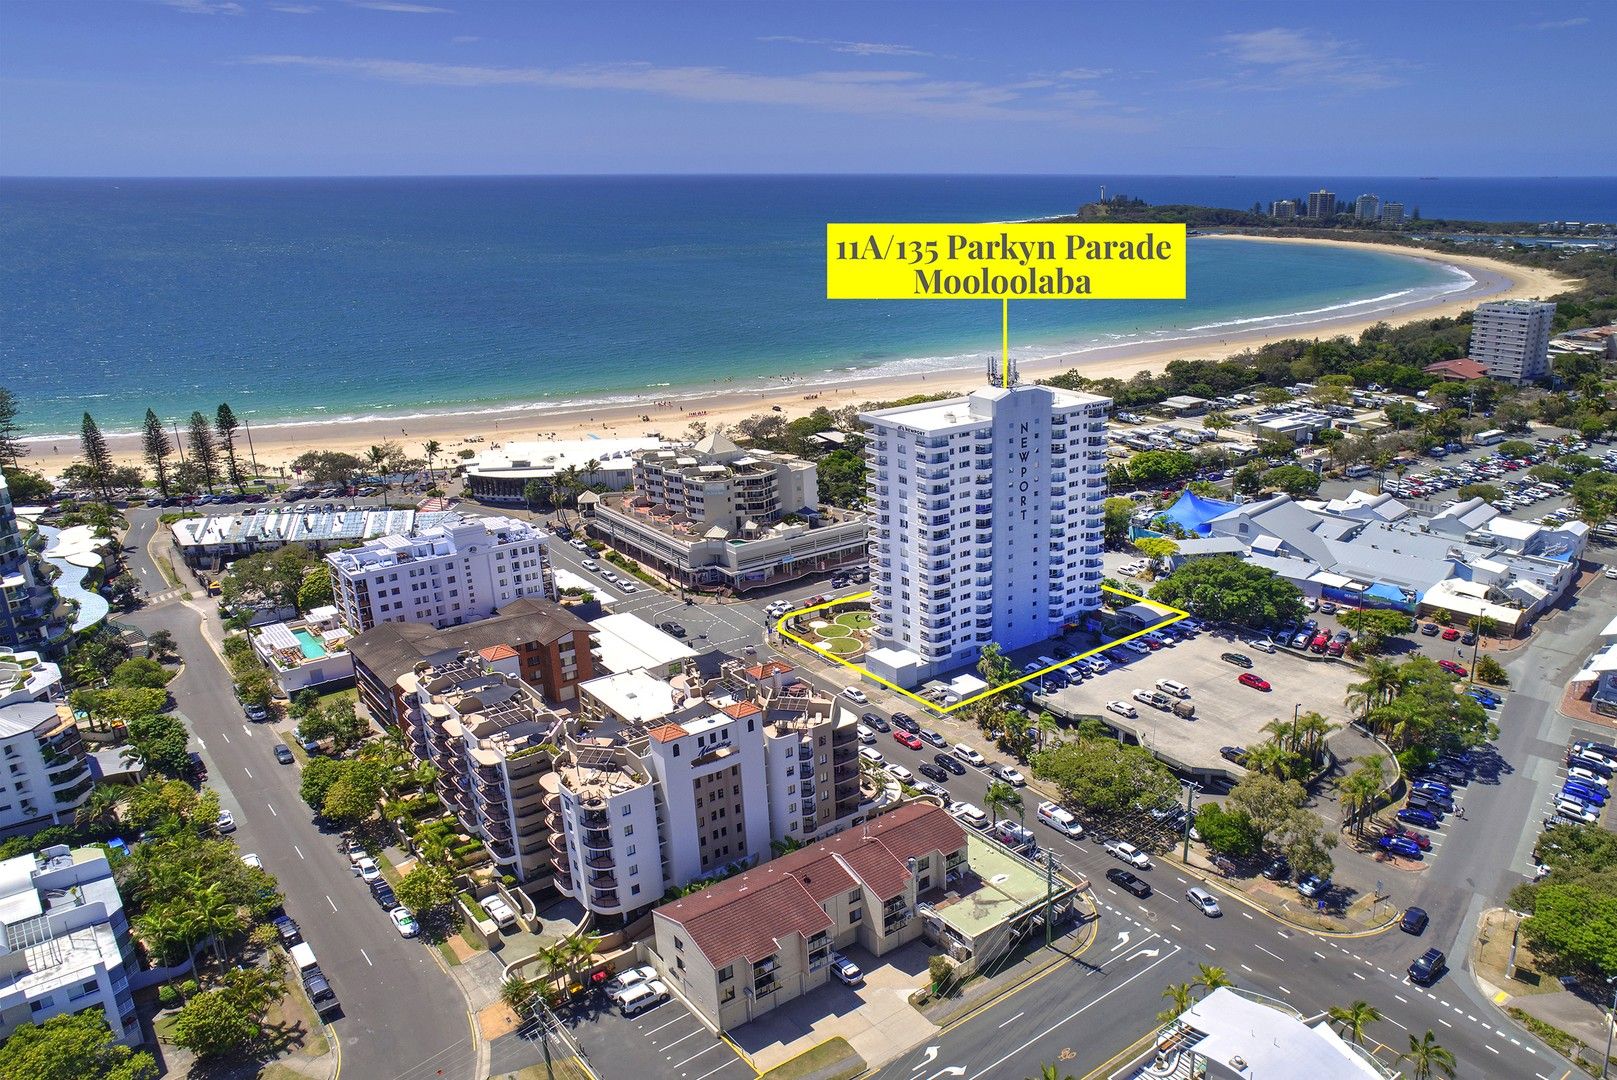 3 bedrooms Apartment / Unit / Flat in 43/135 Parkyn Parade MOOLOOLABA QLD, 4557